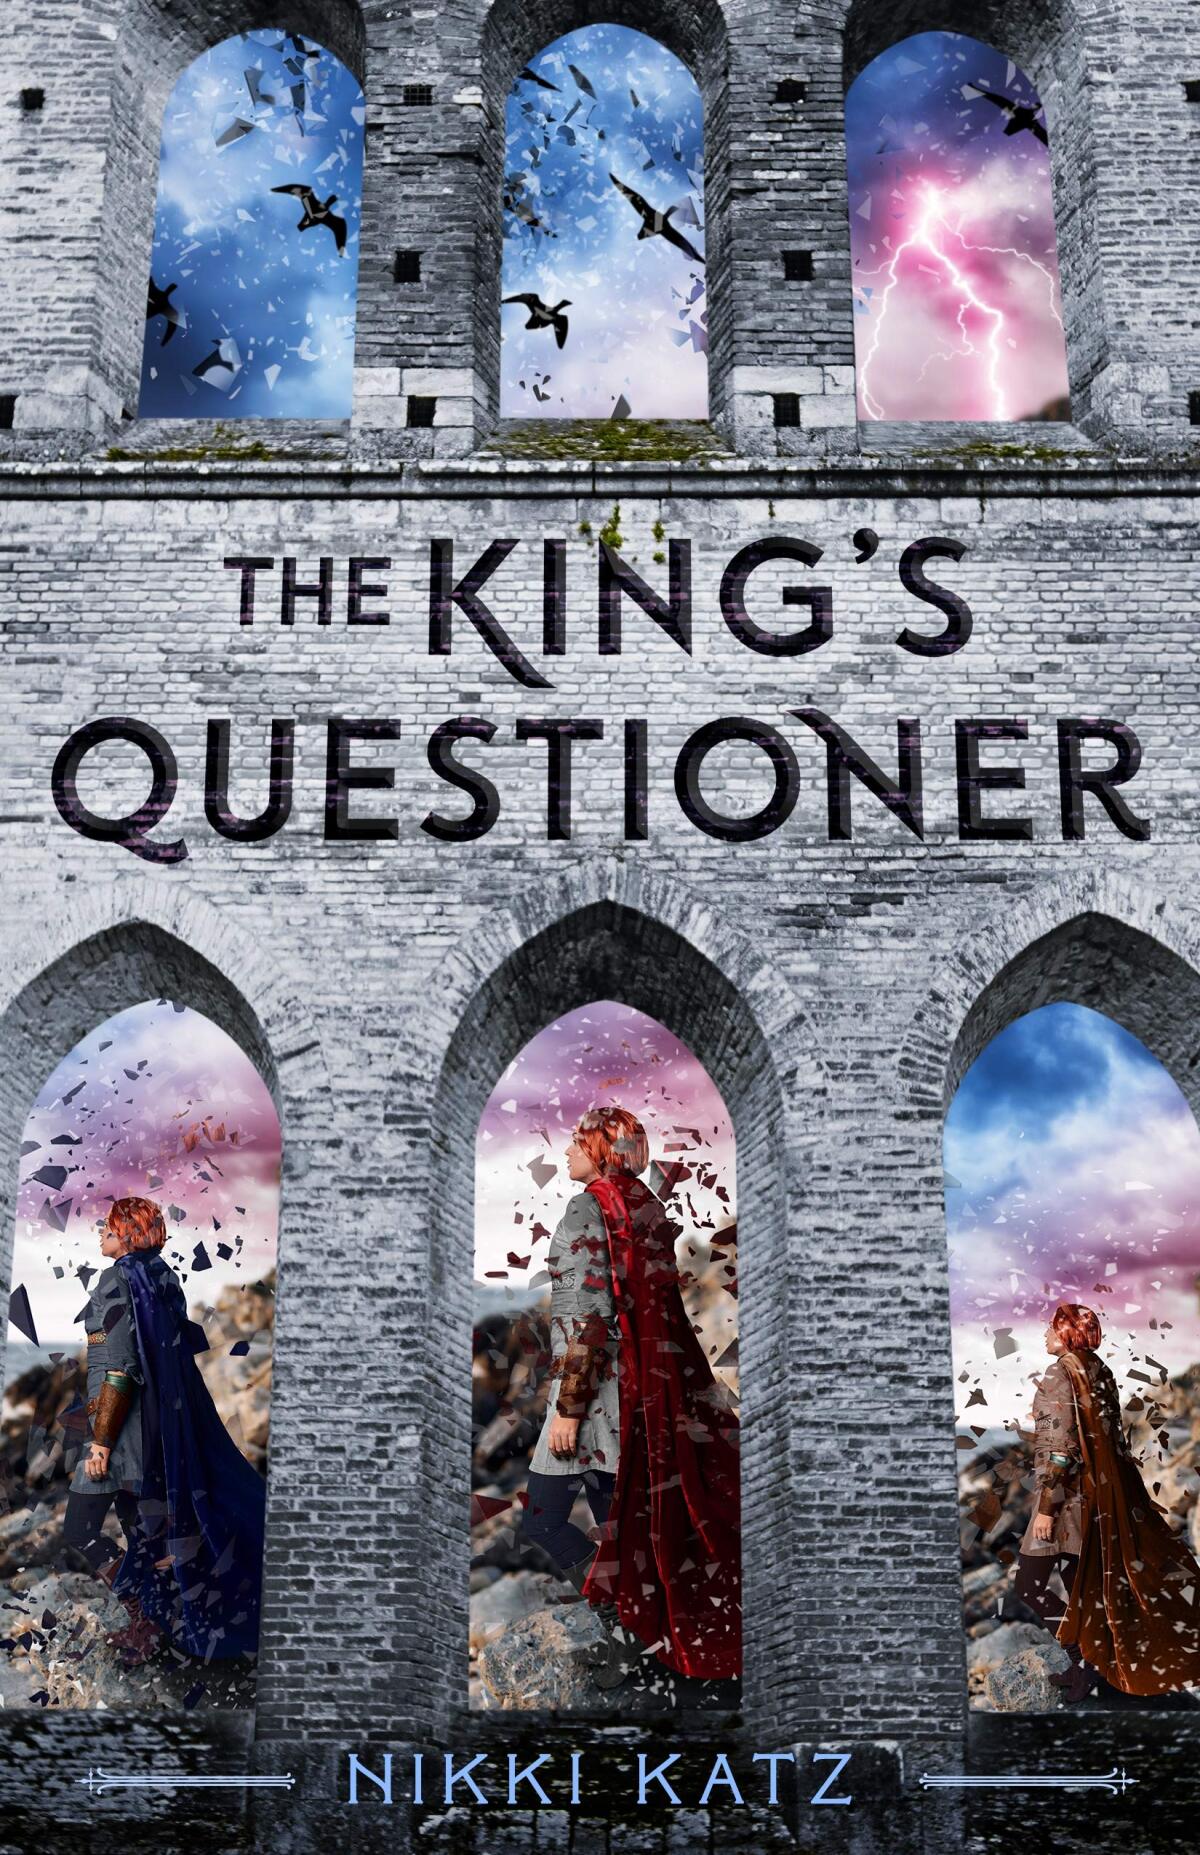 "The King's Questioner" by Nikki Katz